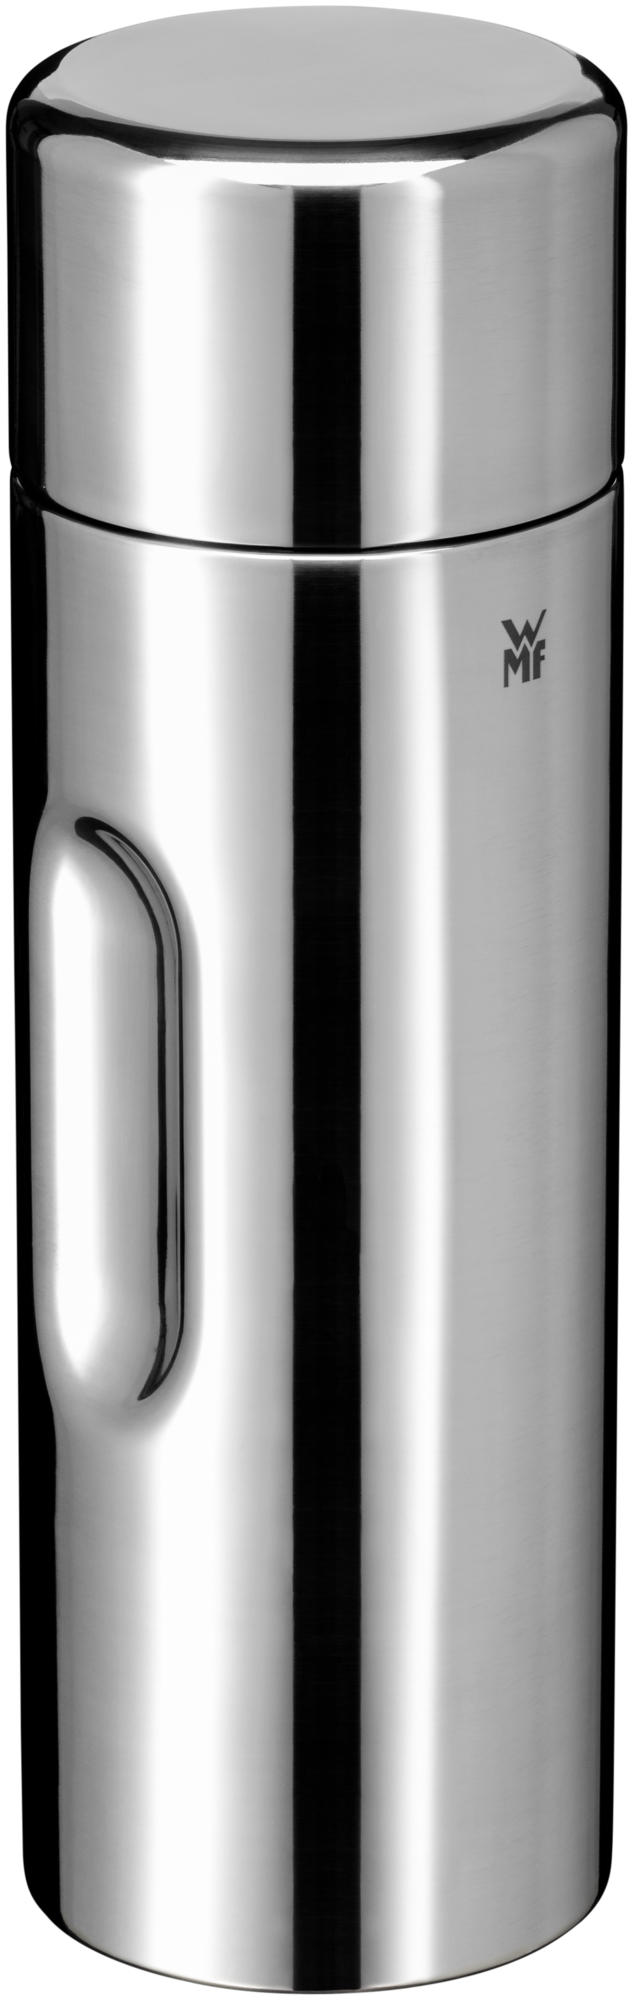 MOTION Vacuum flask 0.75l stainless steel